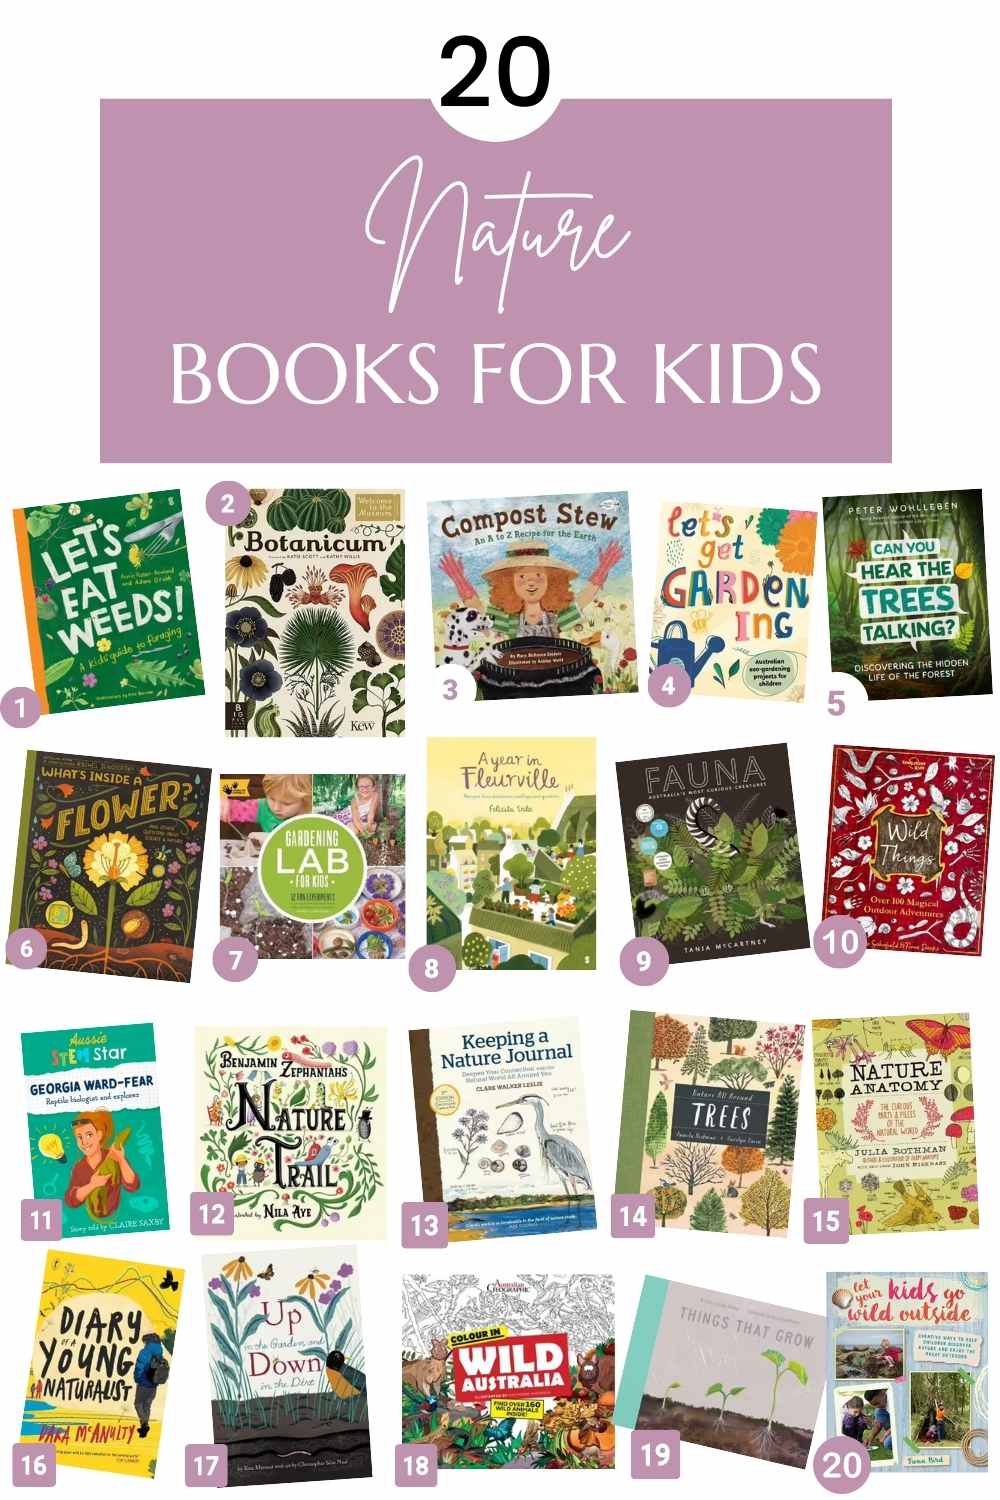 21 Children's Books About Gardening and Nature